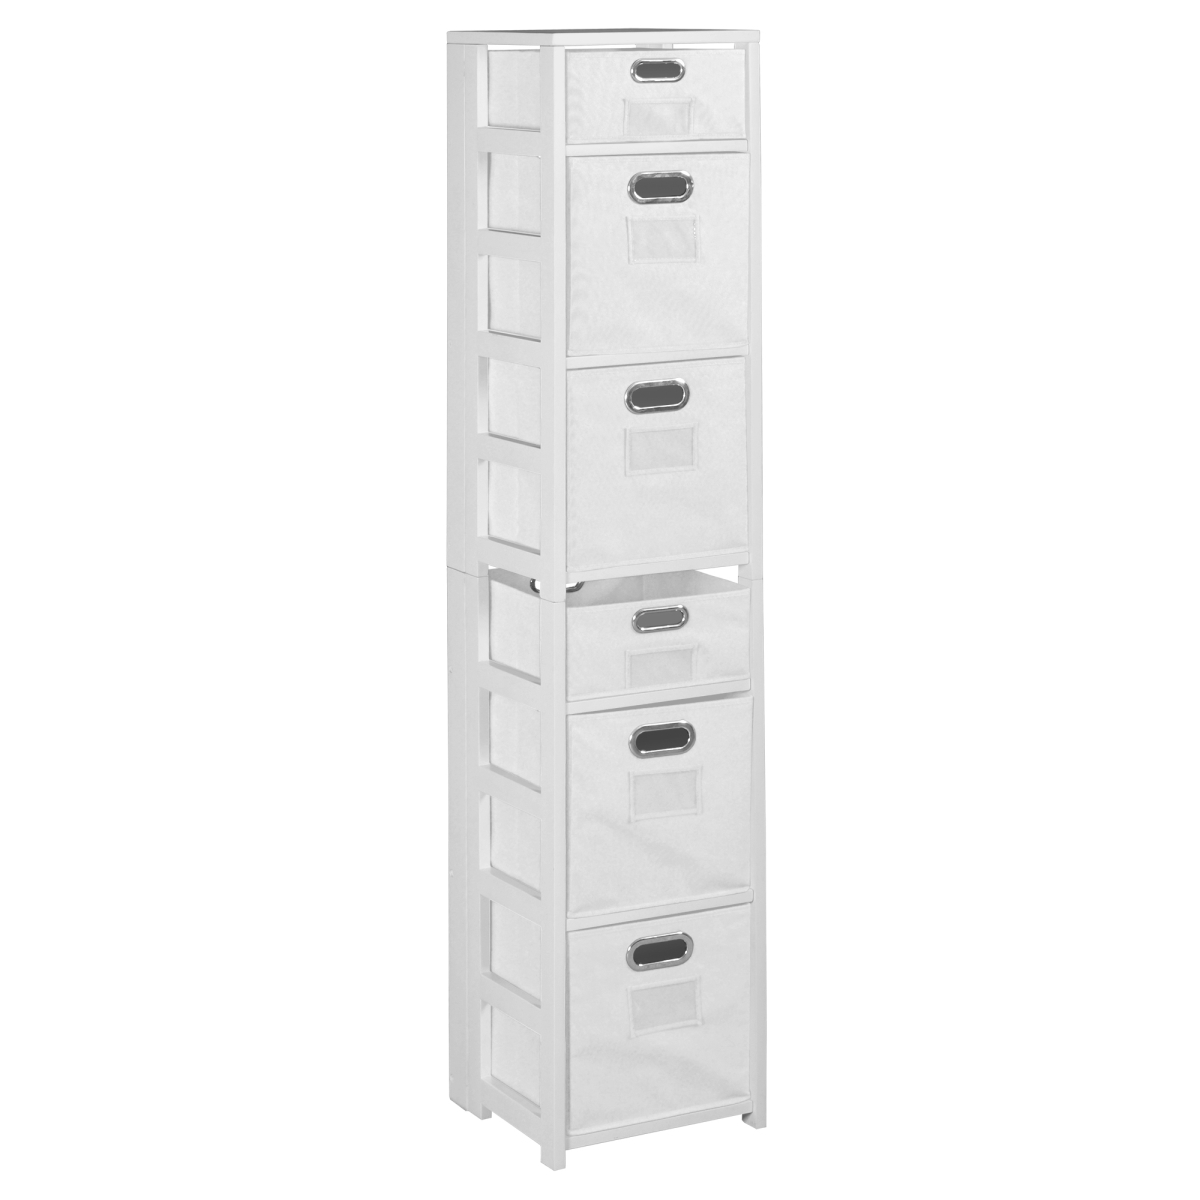 Ffsq6712whwh 67 In. Flip Flop Square Folding Bookcase With Folding Fabric Bins- White & White